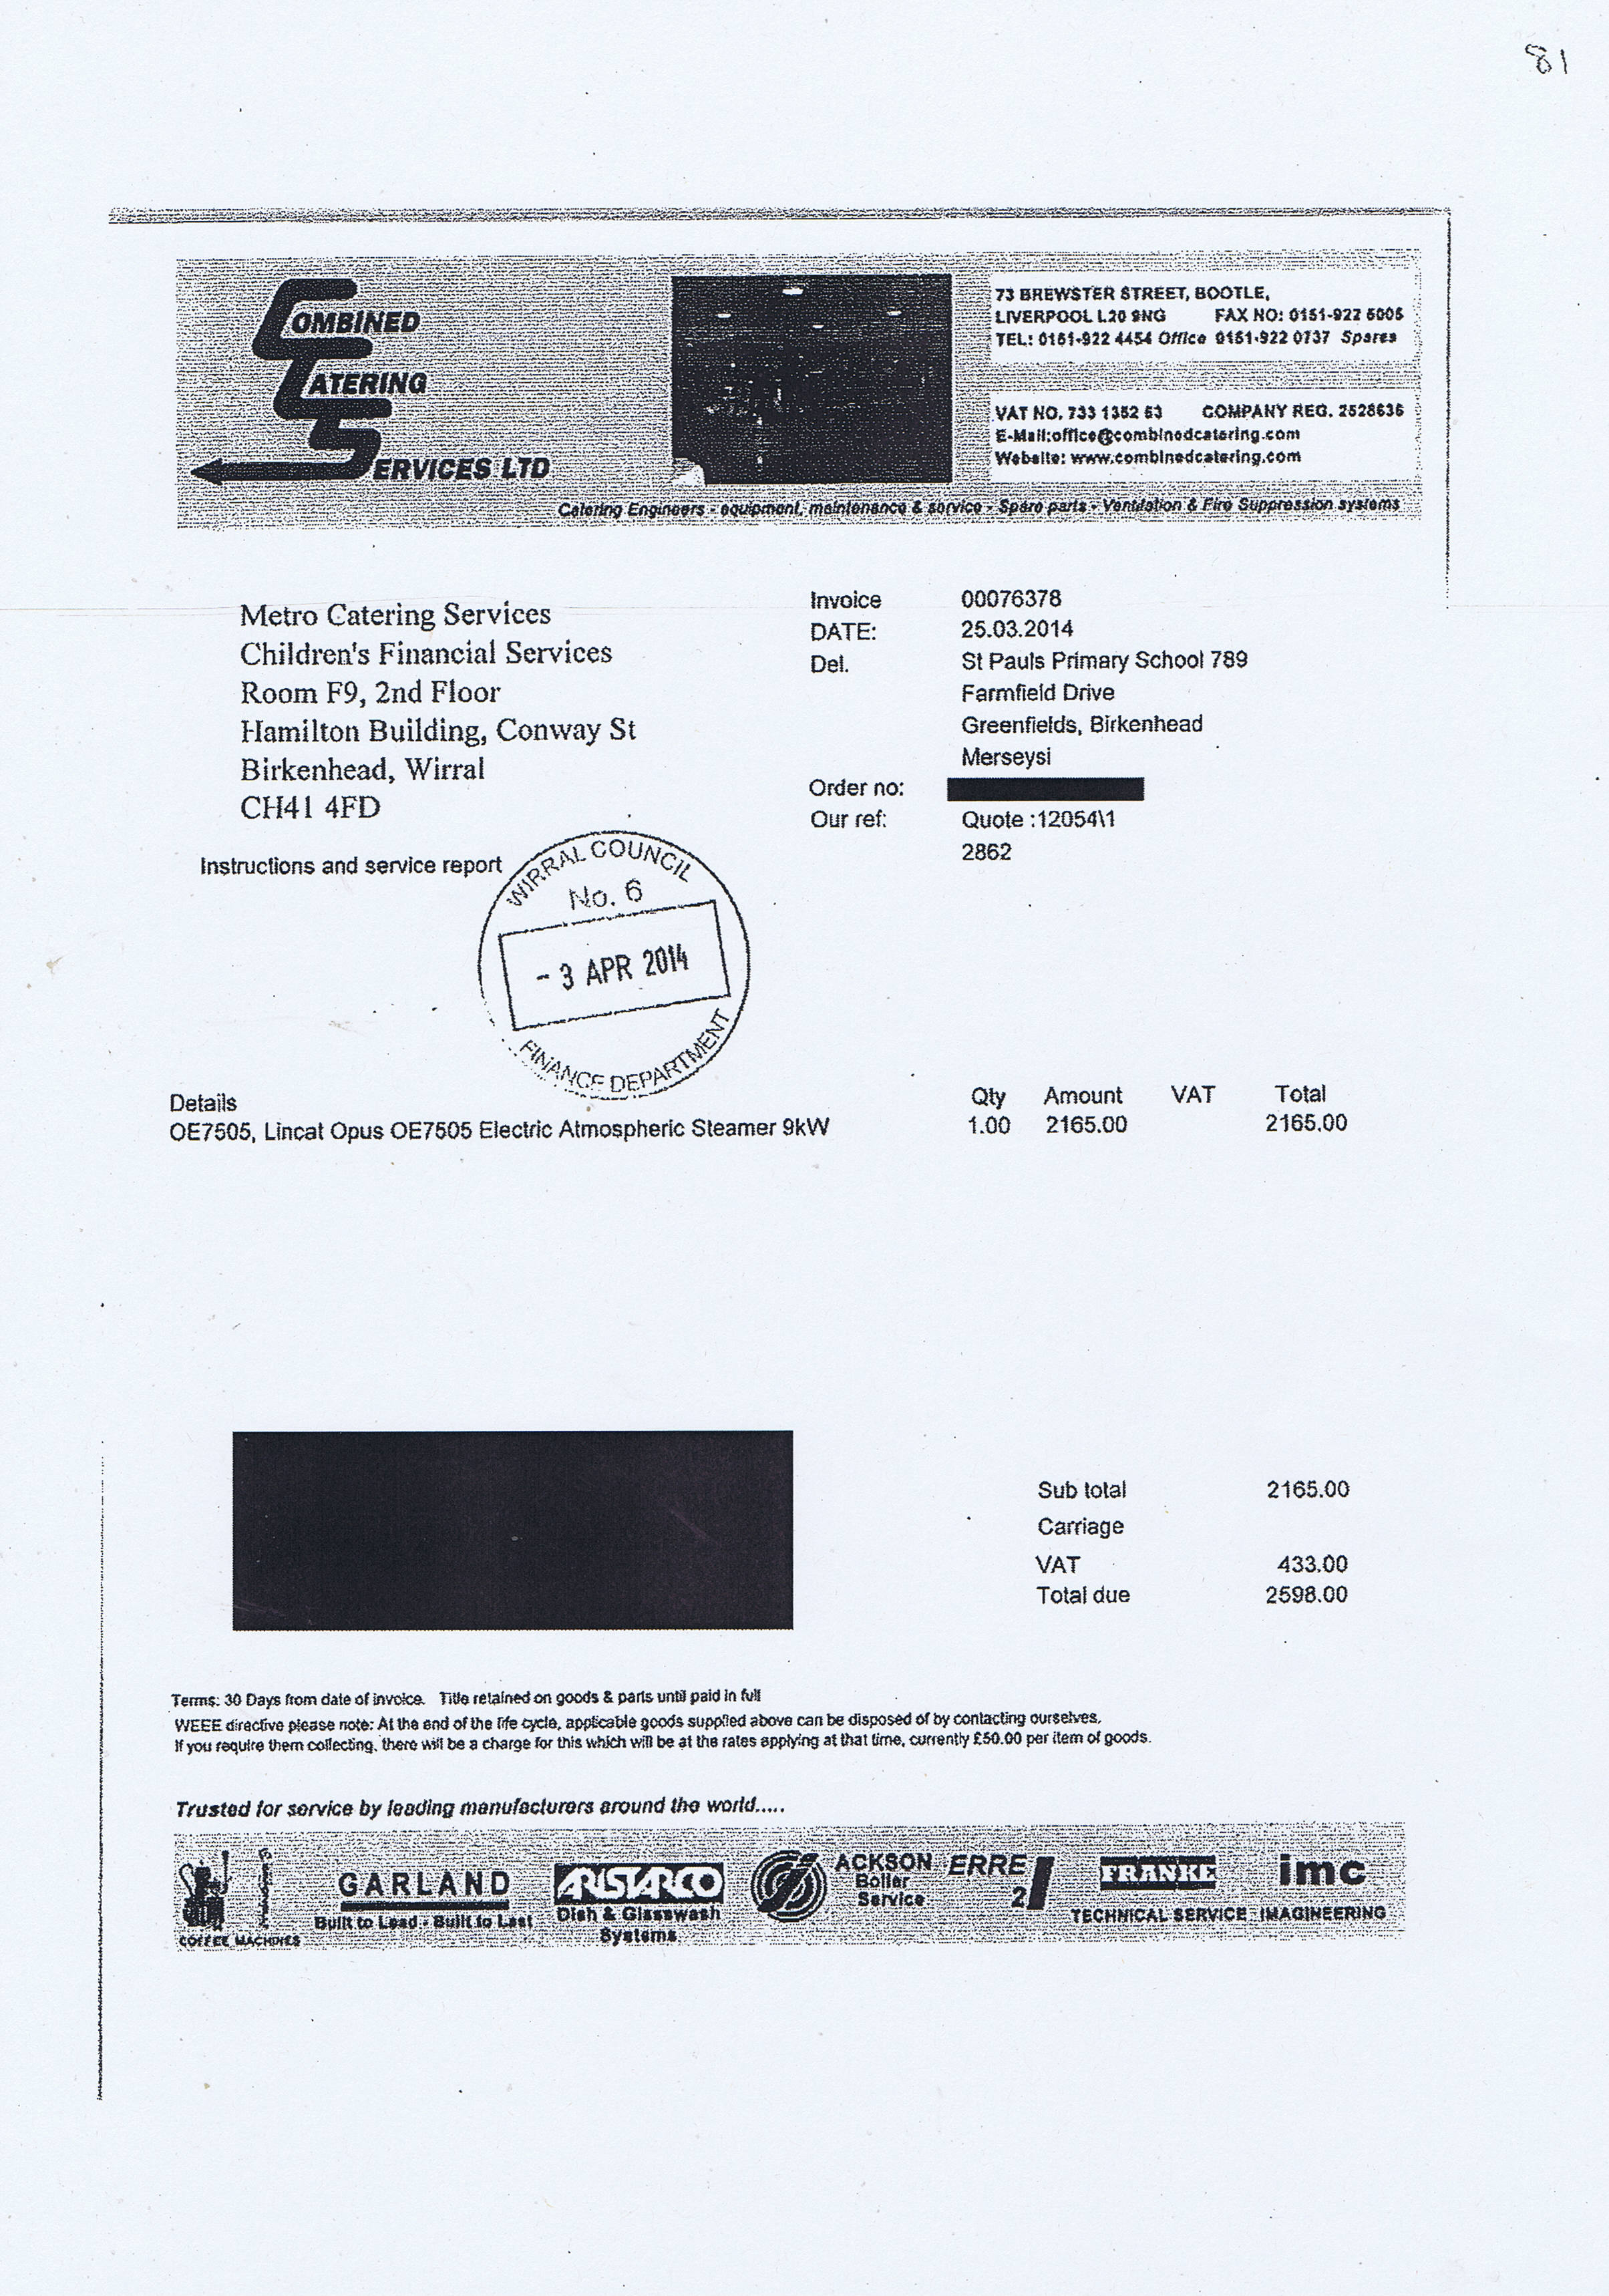 Wirral Council invoice 81 Combined Catering Services Ltd £2598